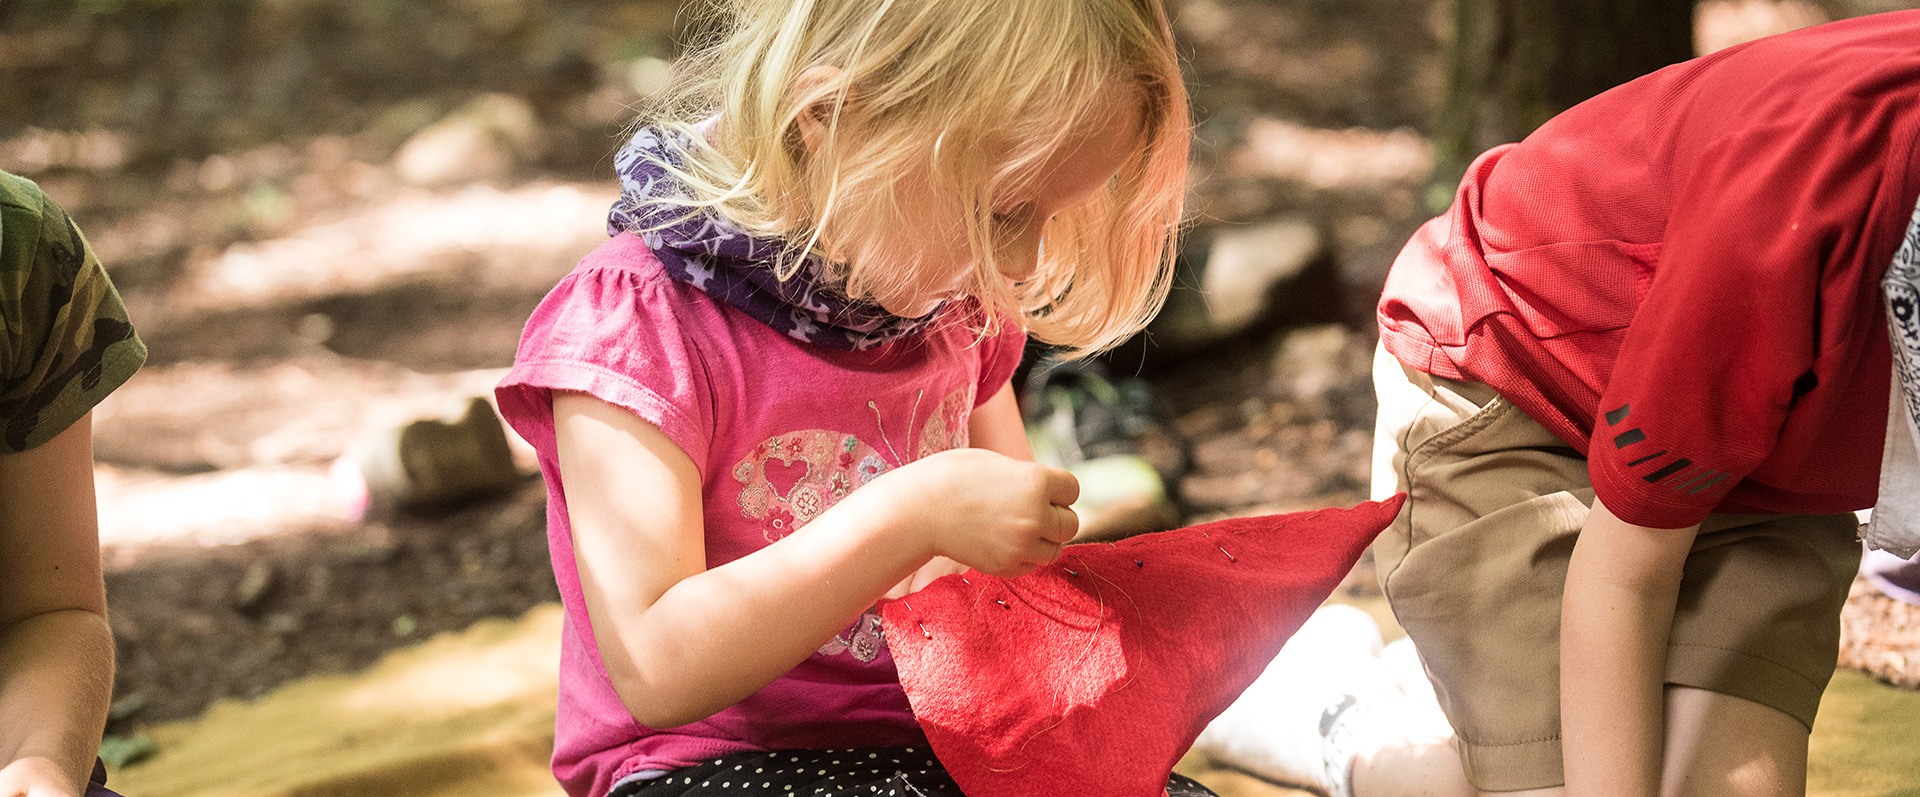 Sewing a felt hat at outdoor crafts summer camp